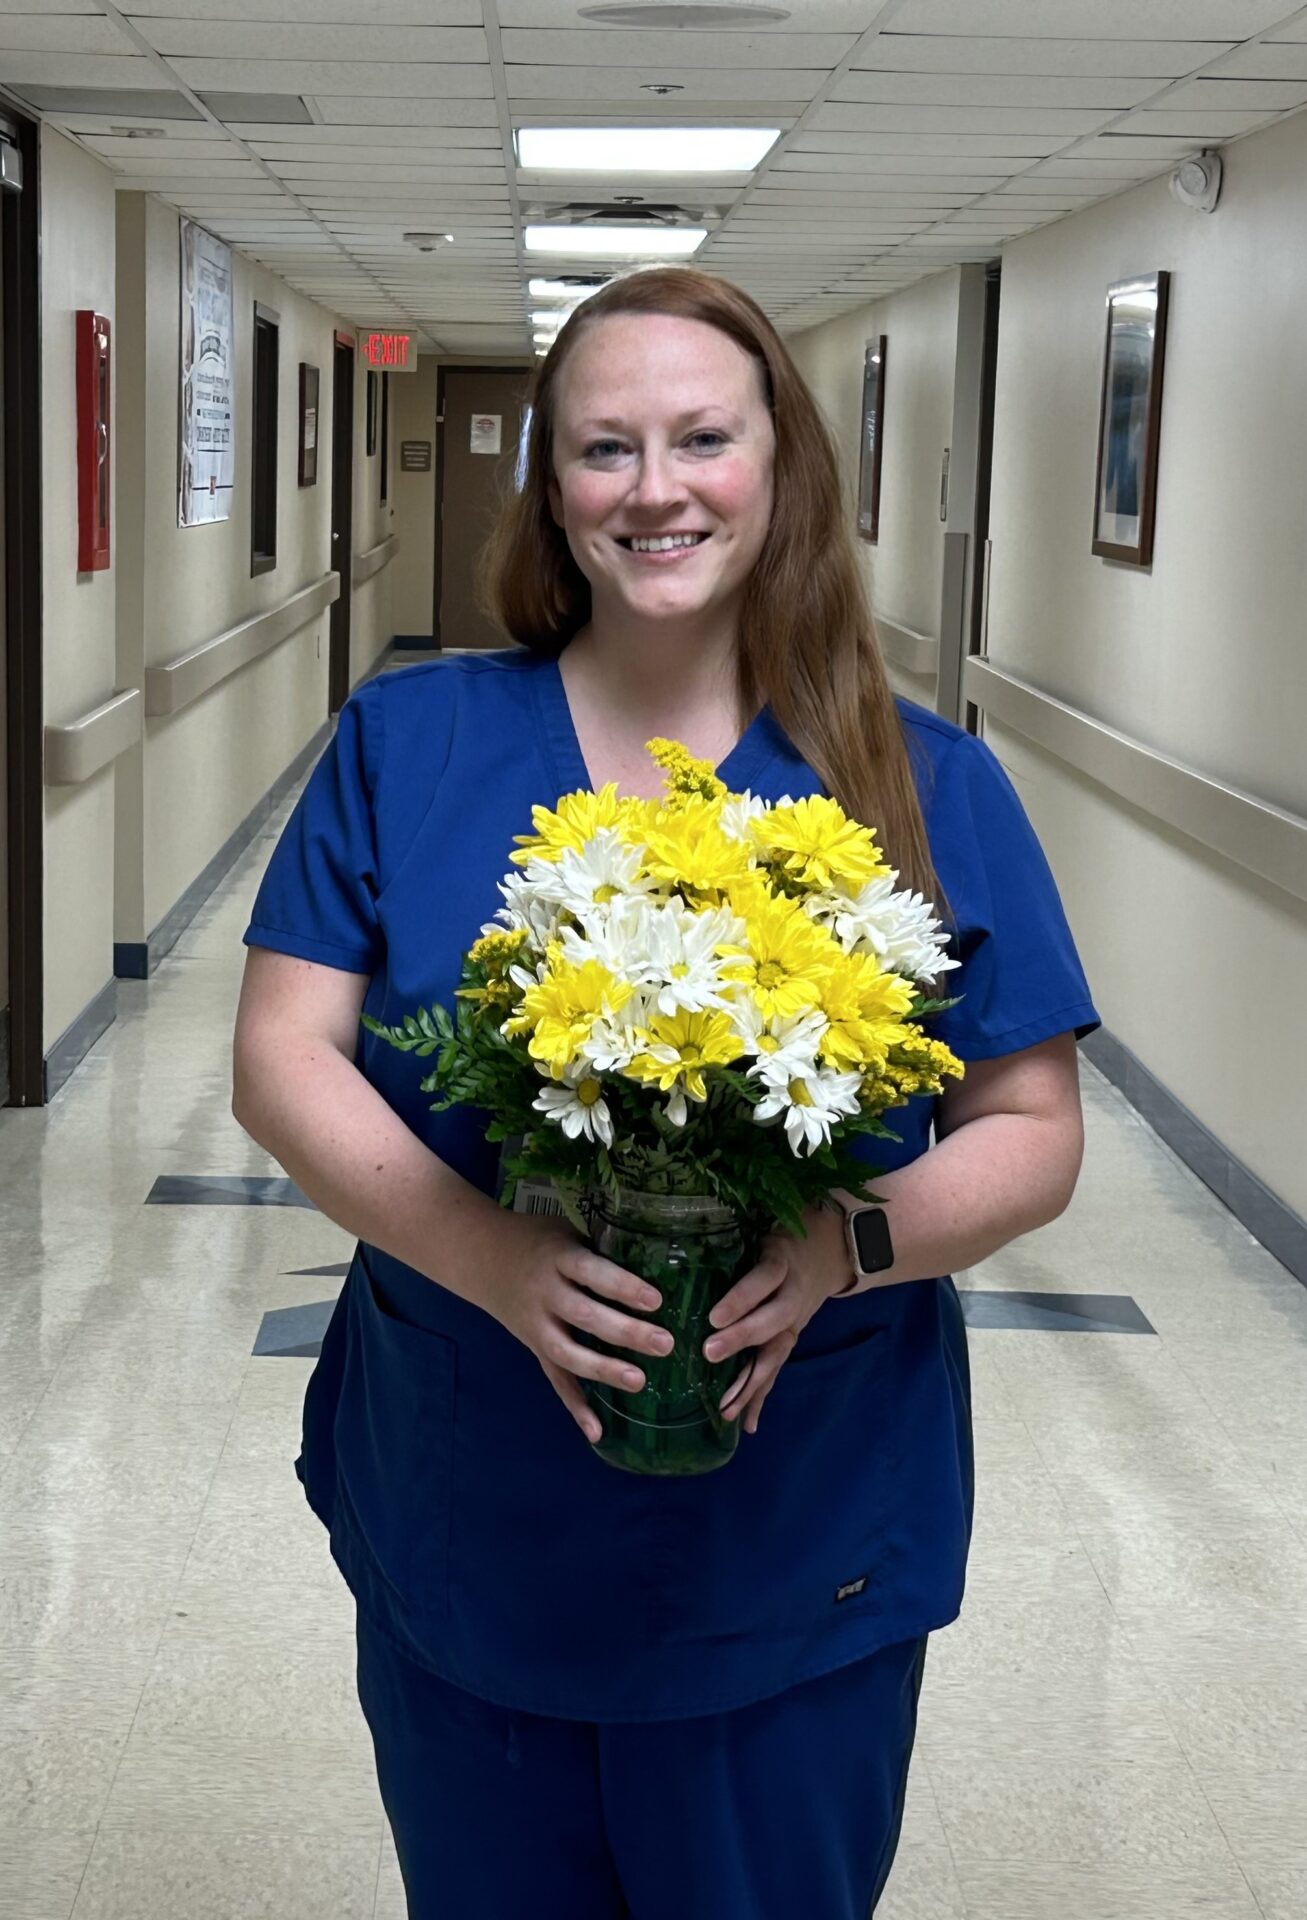 Emily is pictured here with her DAISY bouquet after leadership team presented her DAISY award. 